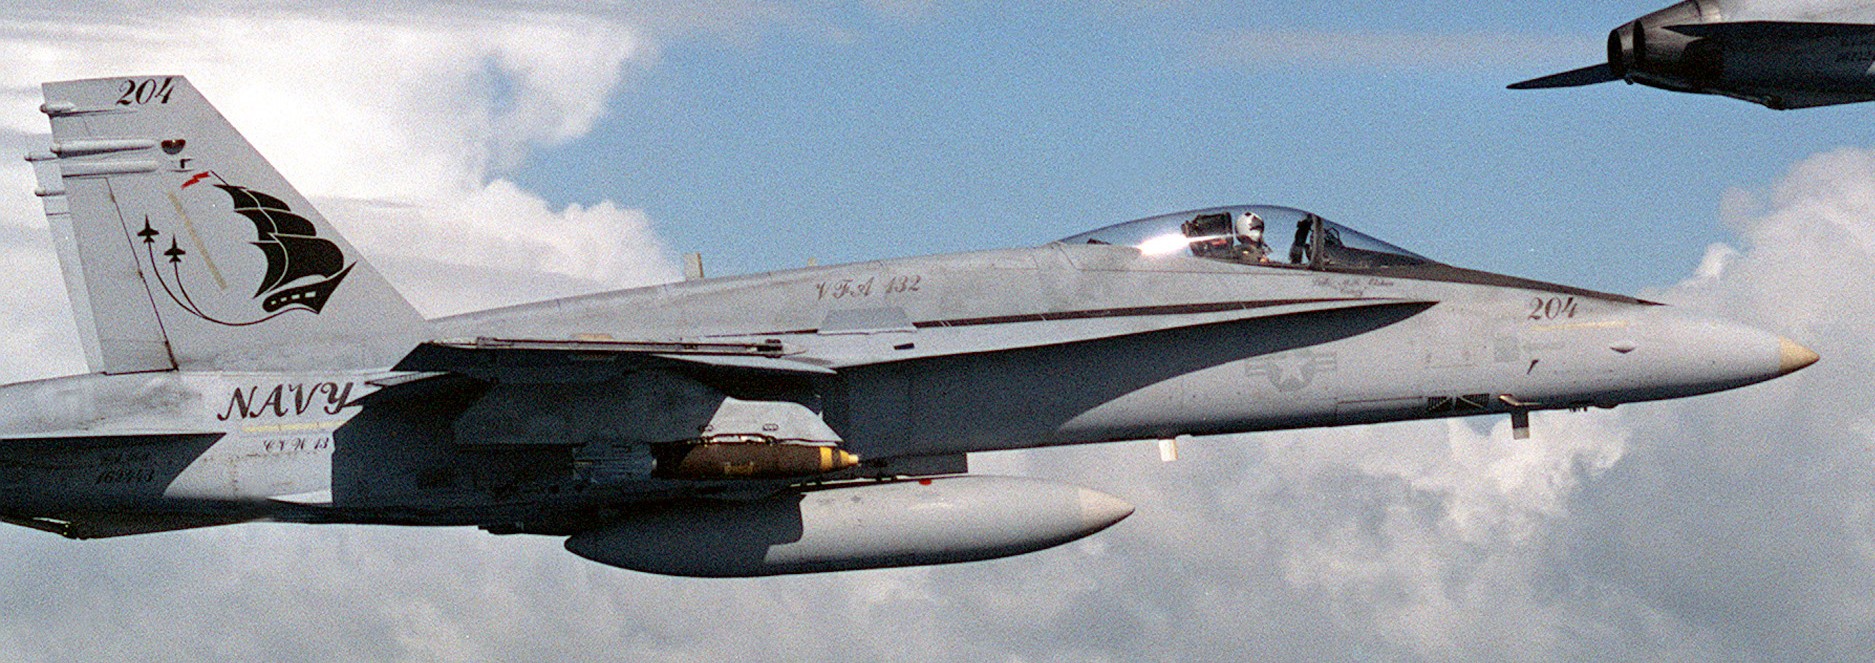 vfa-132 privateers strike fighter squadron f/a-18a hornet cvw-13 uss abraham lincoln cvn-72 1990 19